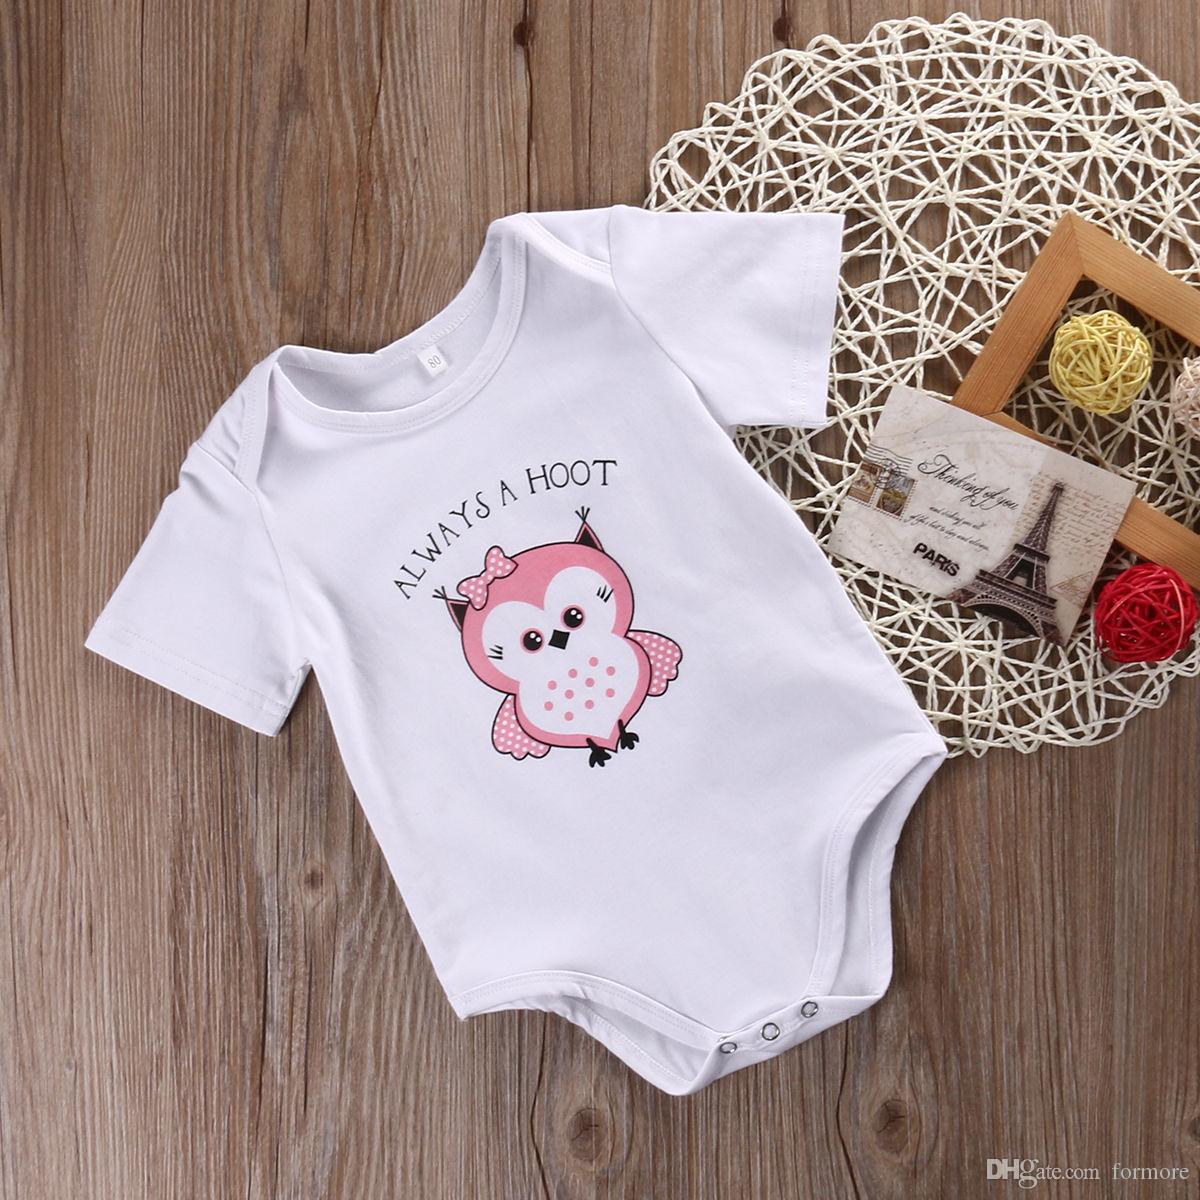 Red T. recommend best of baby girl sweet